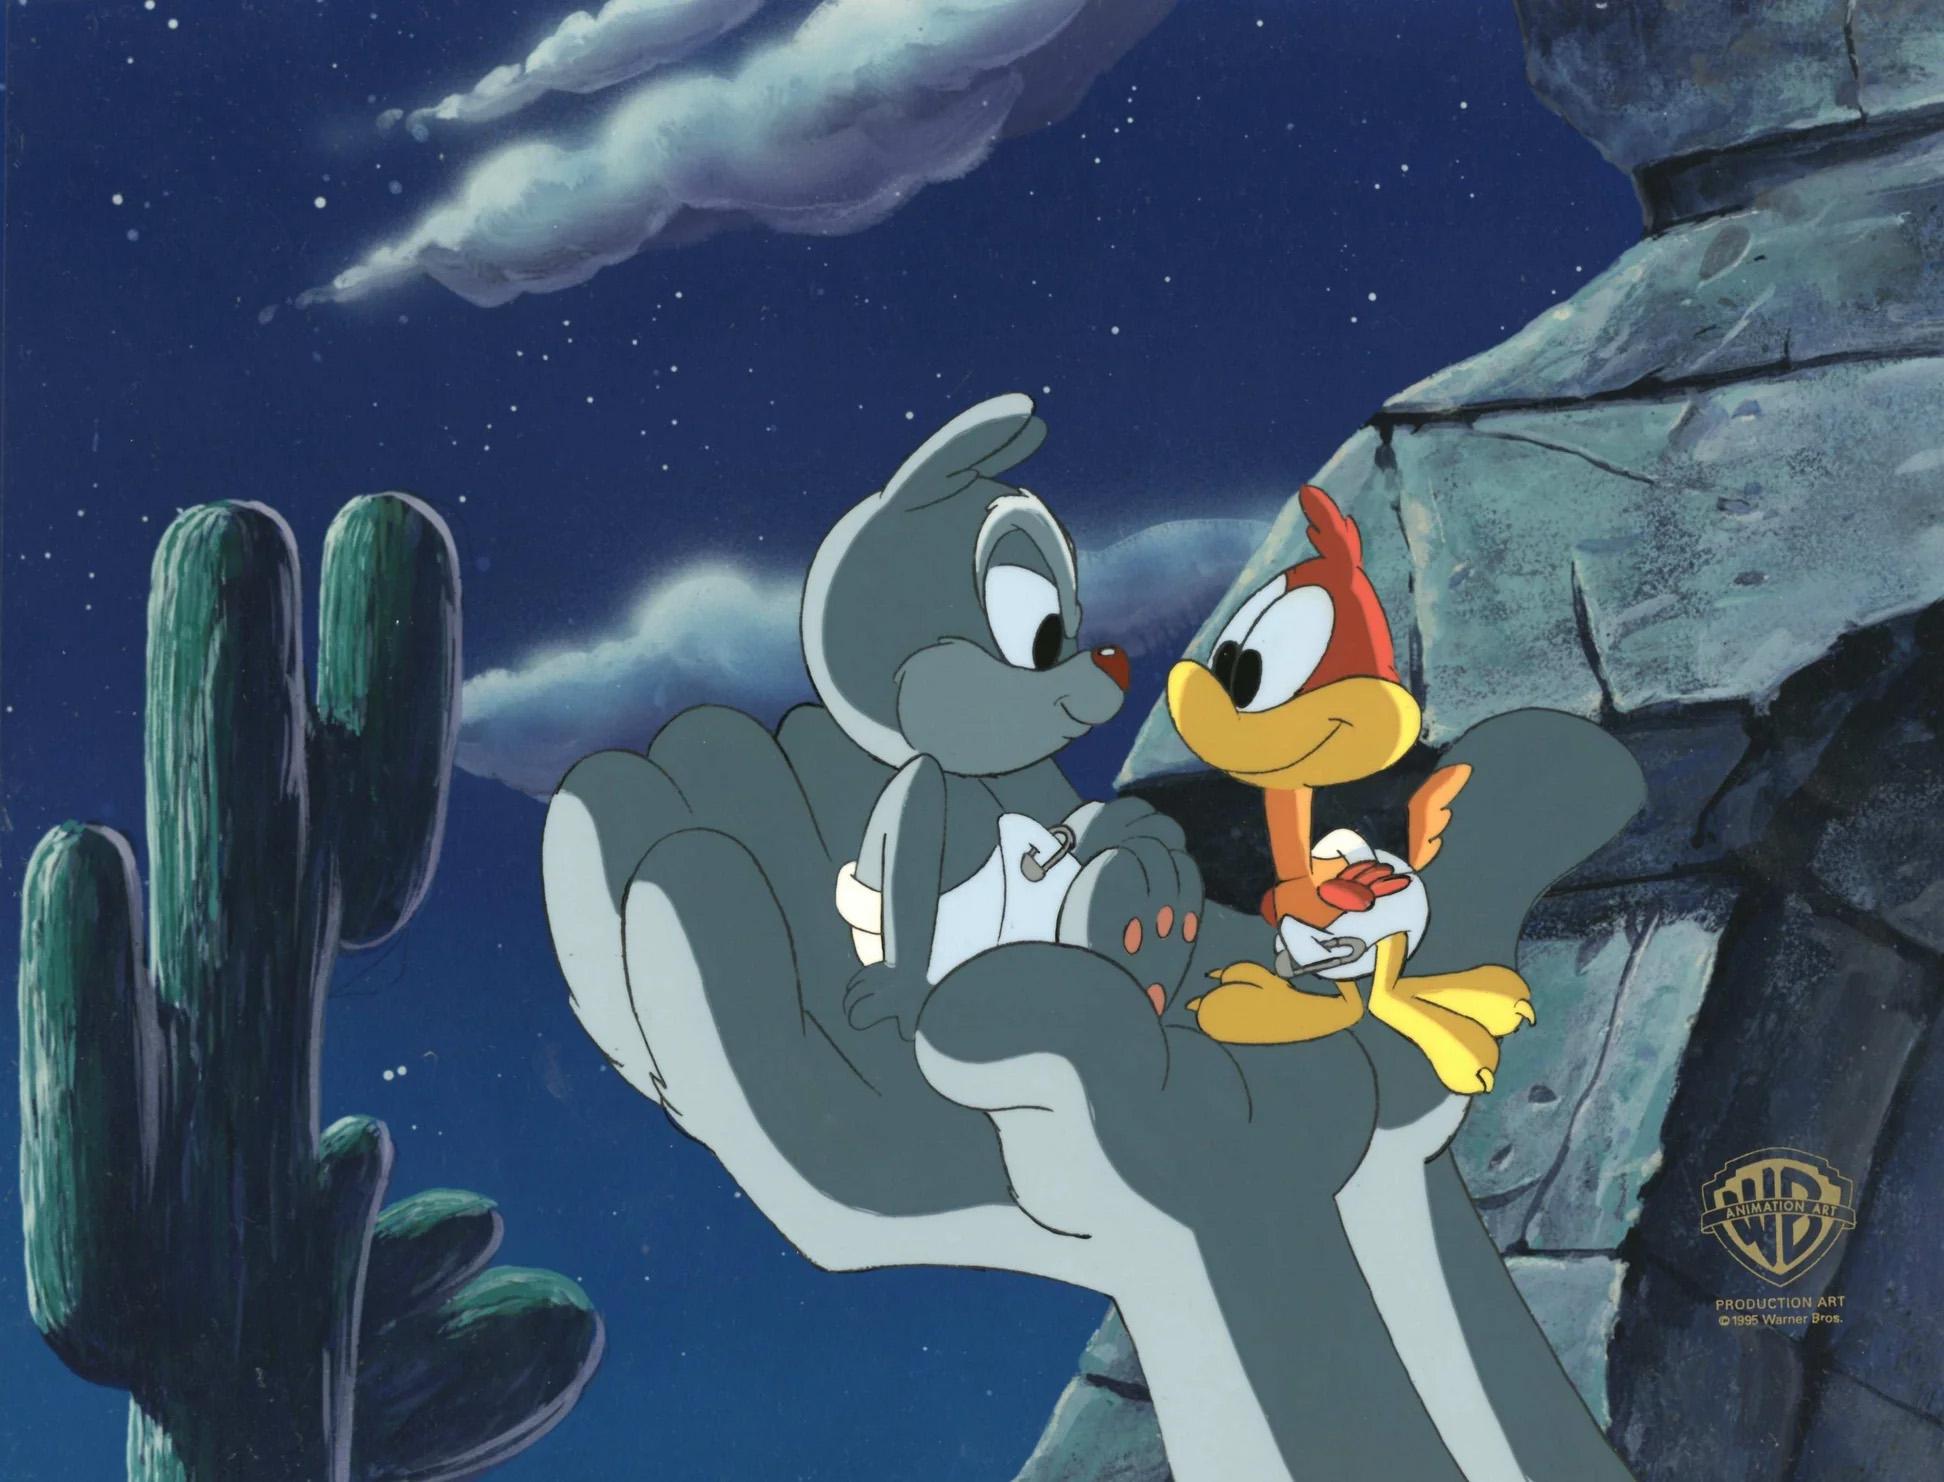 Tiny Toons Original Production Cel: Calamity and Little Beeper - Art by Warner Bros. Studio Artists